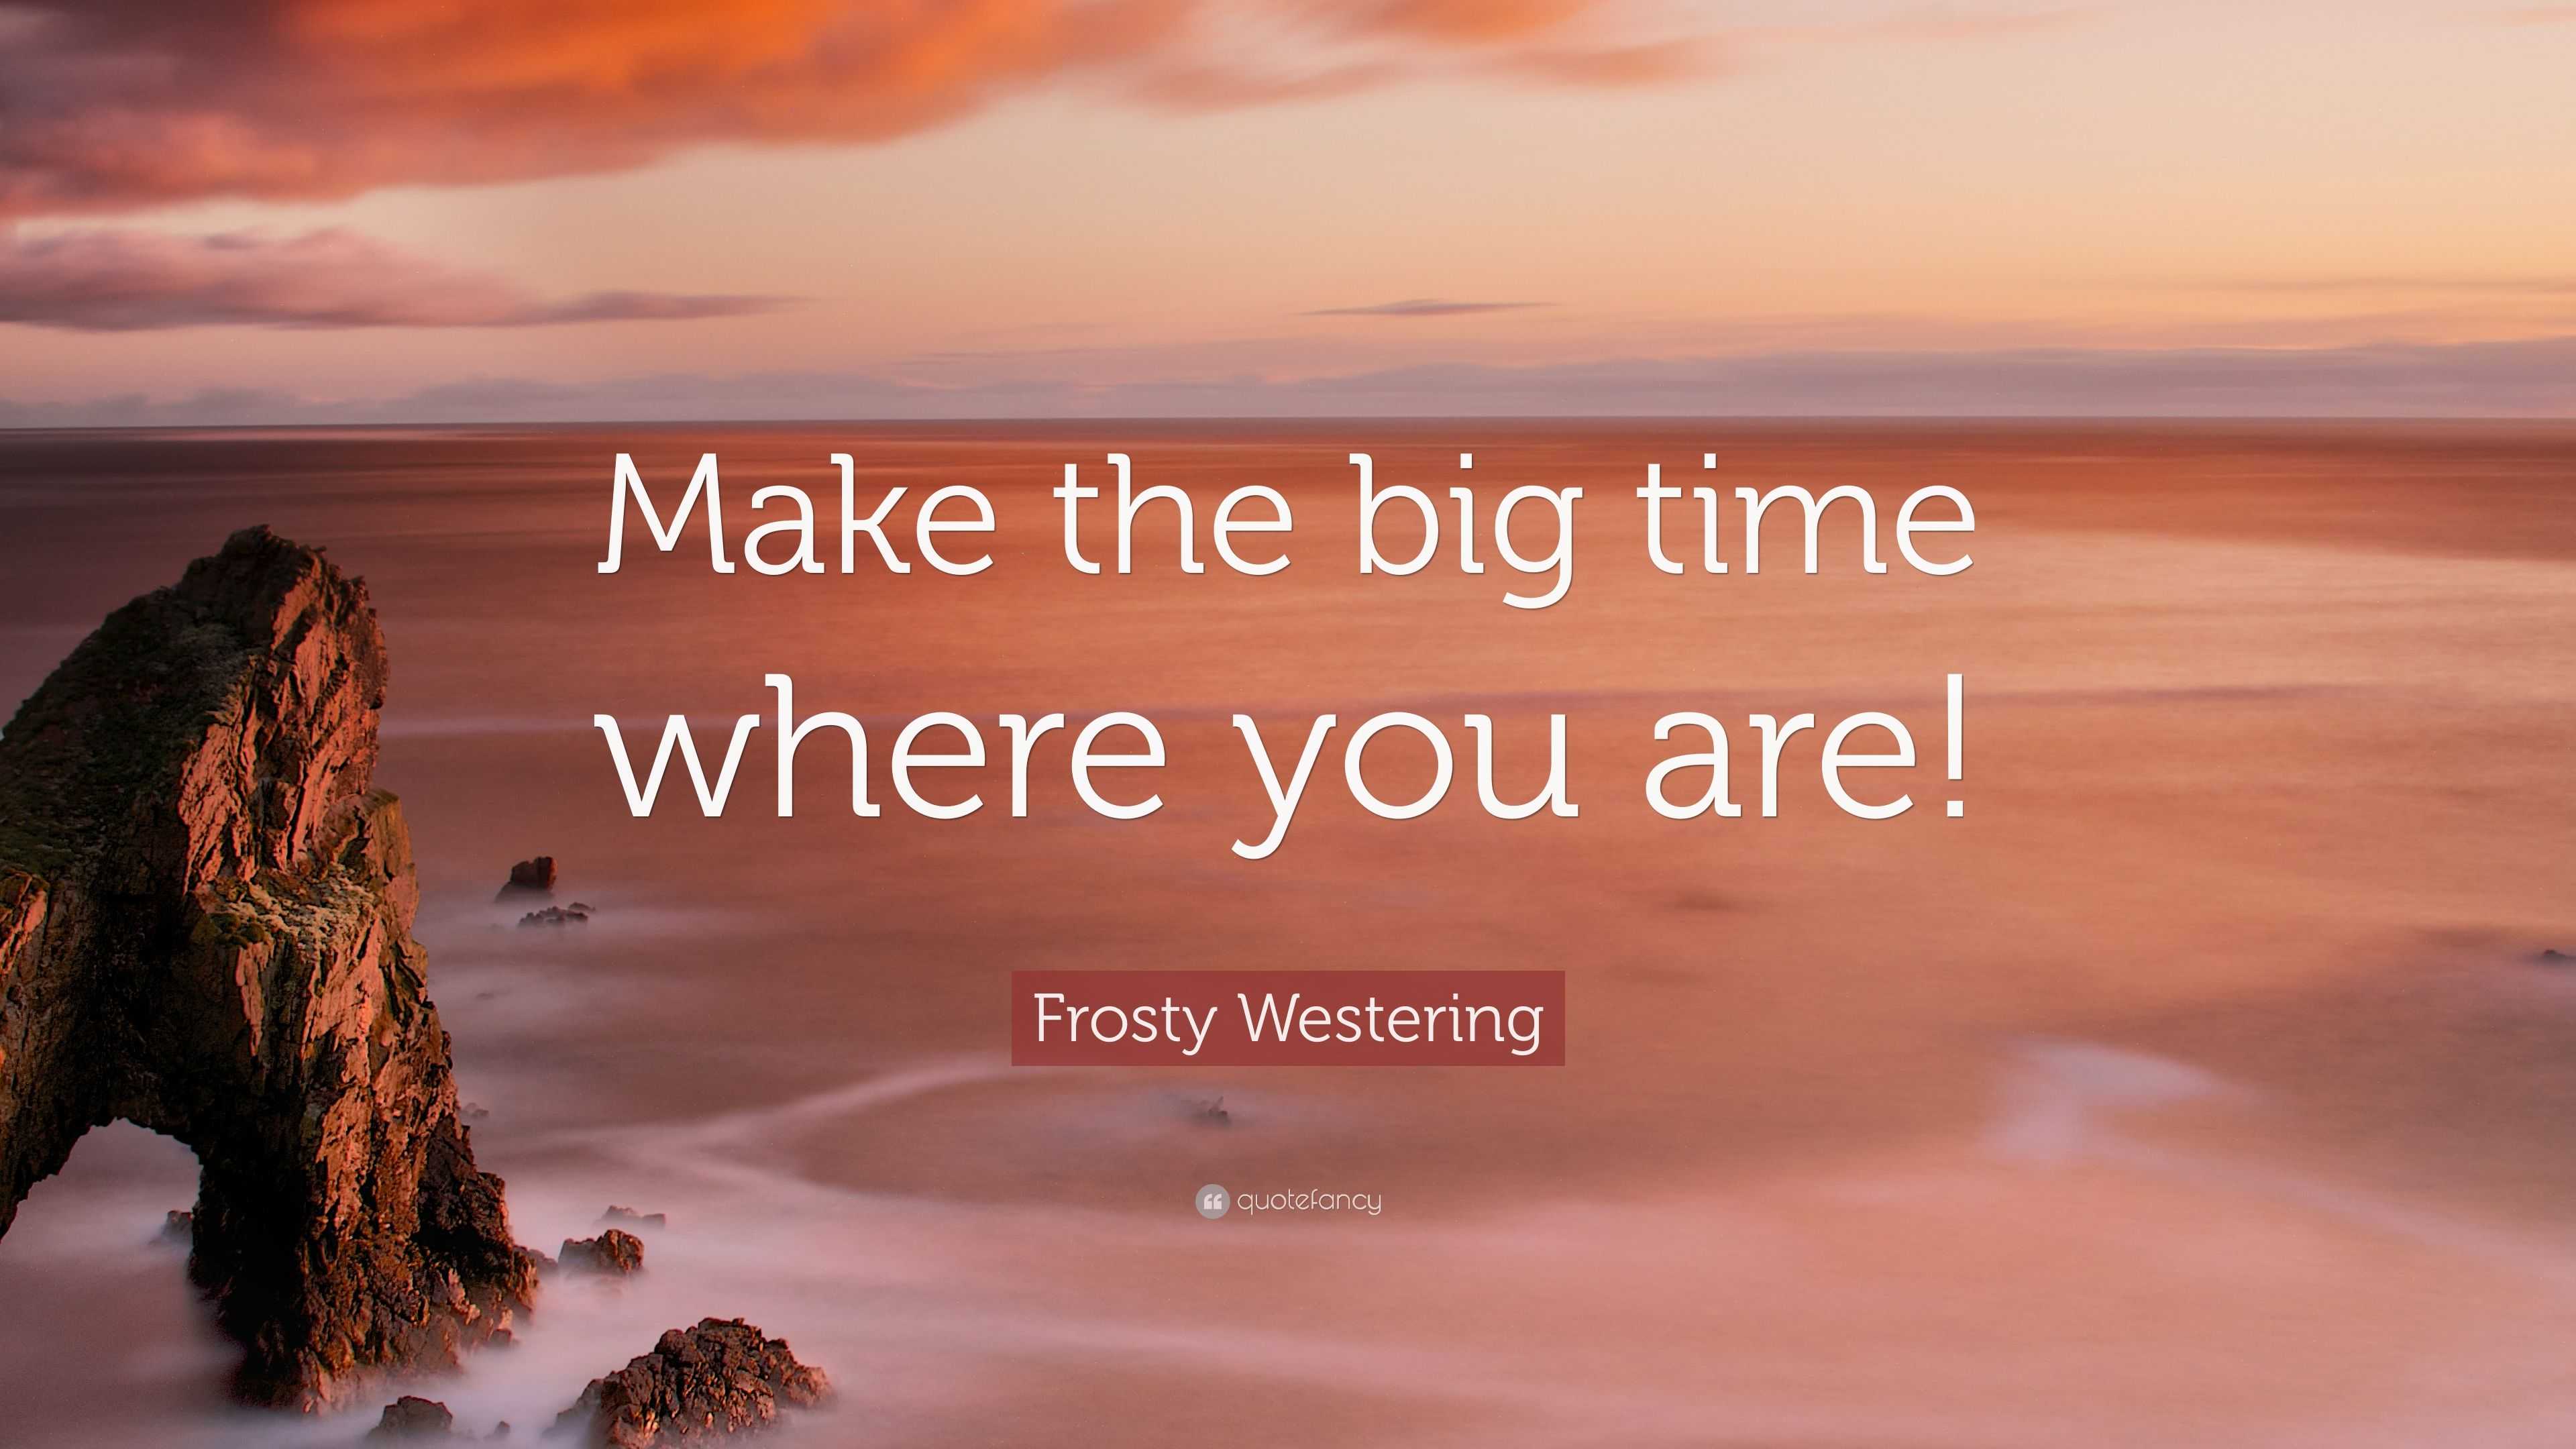 Frosty Westering Quote: “Make the big time where you are!” (10